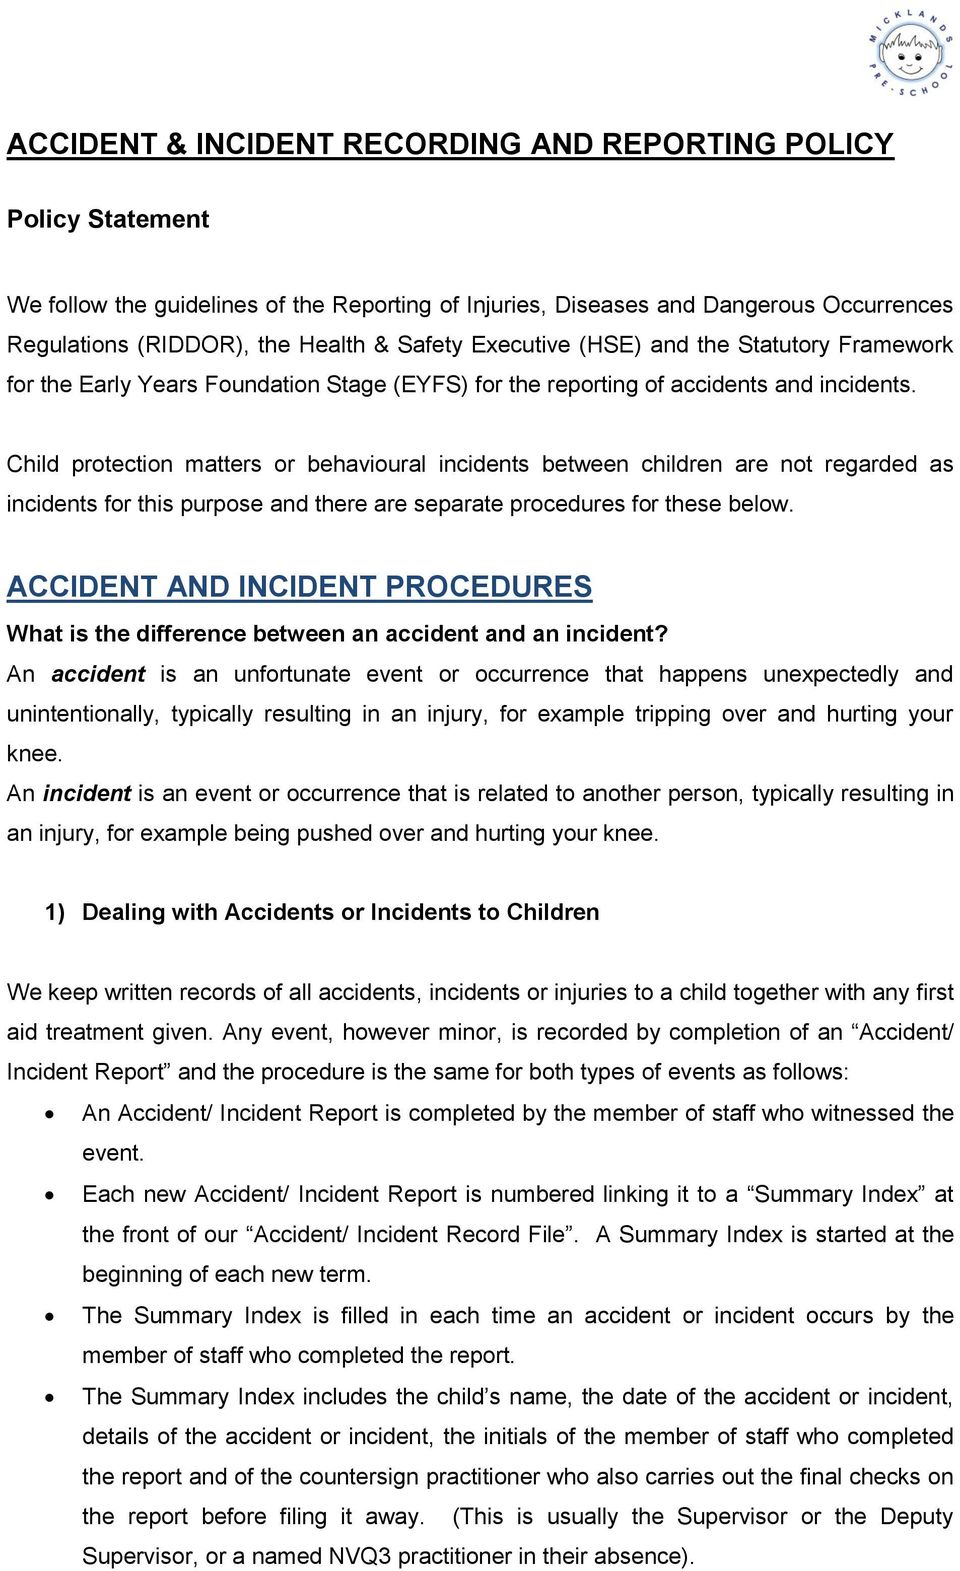 Child protection matters or behavioural incidents between children are not regarded as incidents for this purpose and there are separate procedures for these below.